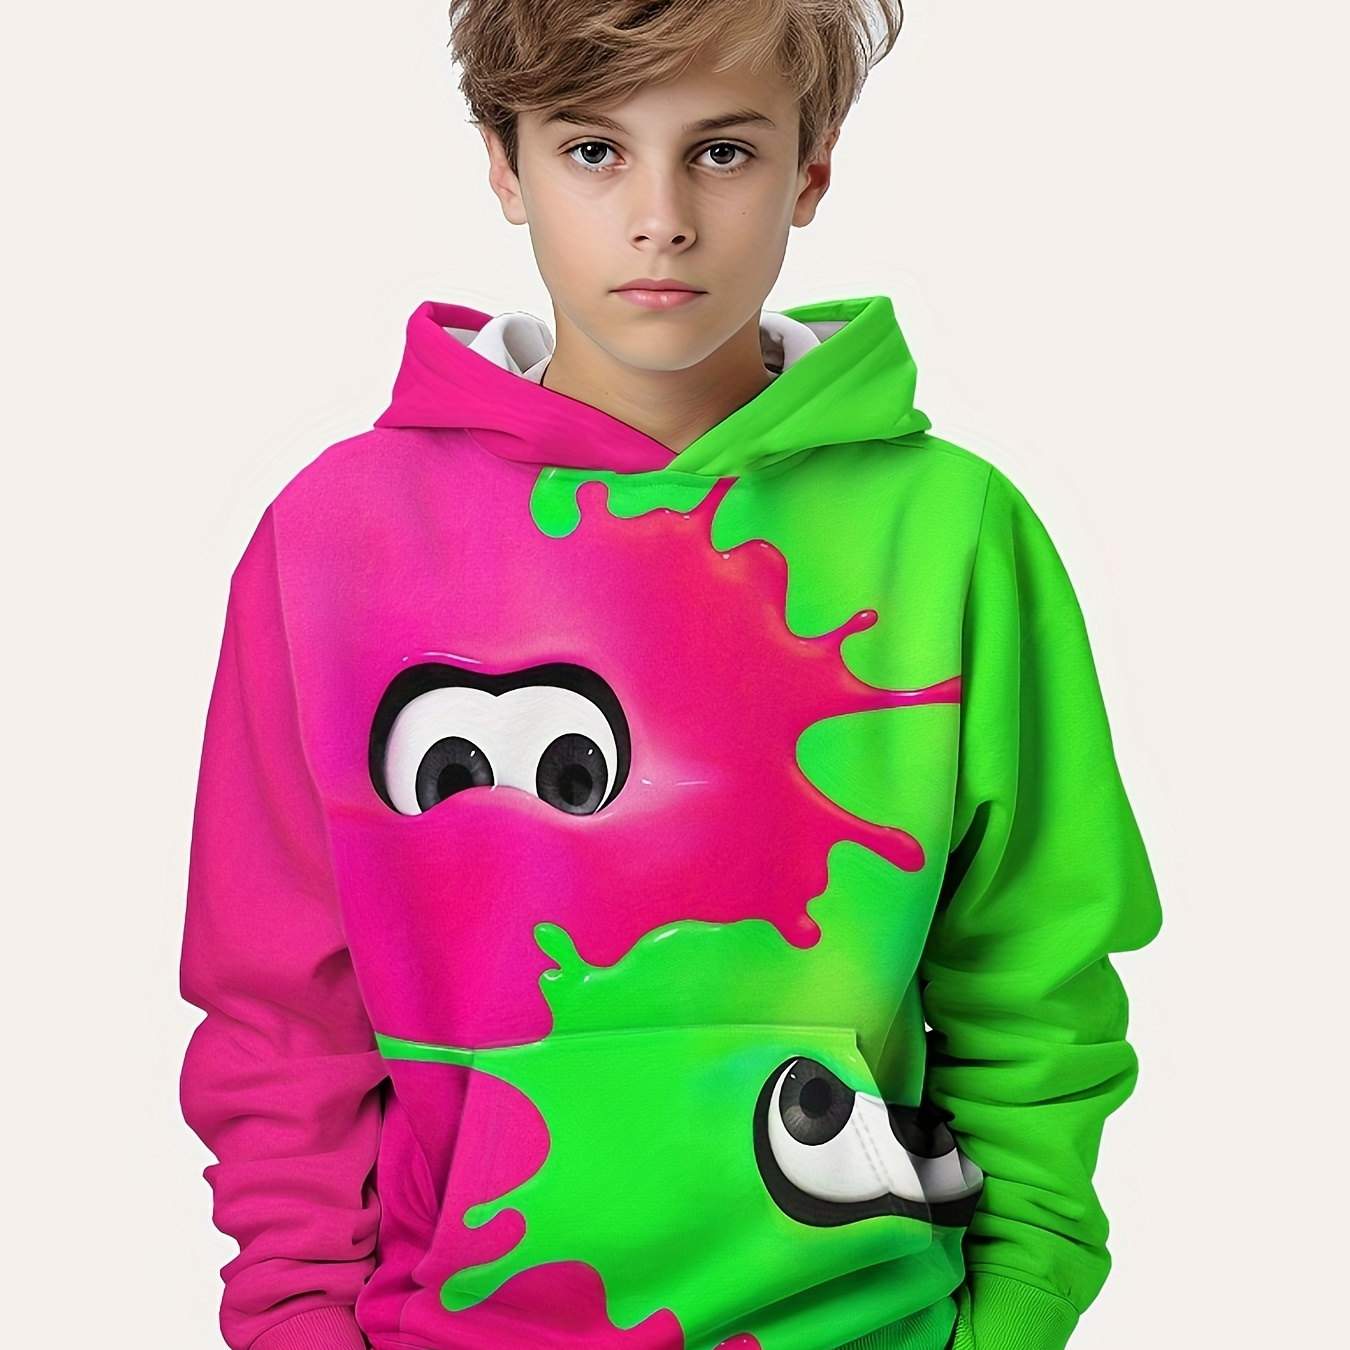 

Novelty Color Block Cartoon Ink 3d Print Boys Hoodie, Stay Stylish And Cozy Sweatshirt - Perfect Spring Fall Winter Essential For Your Little Fashionista!